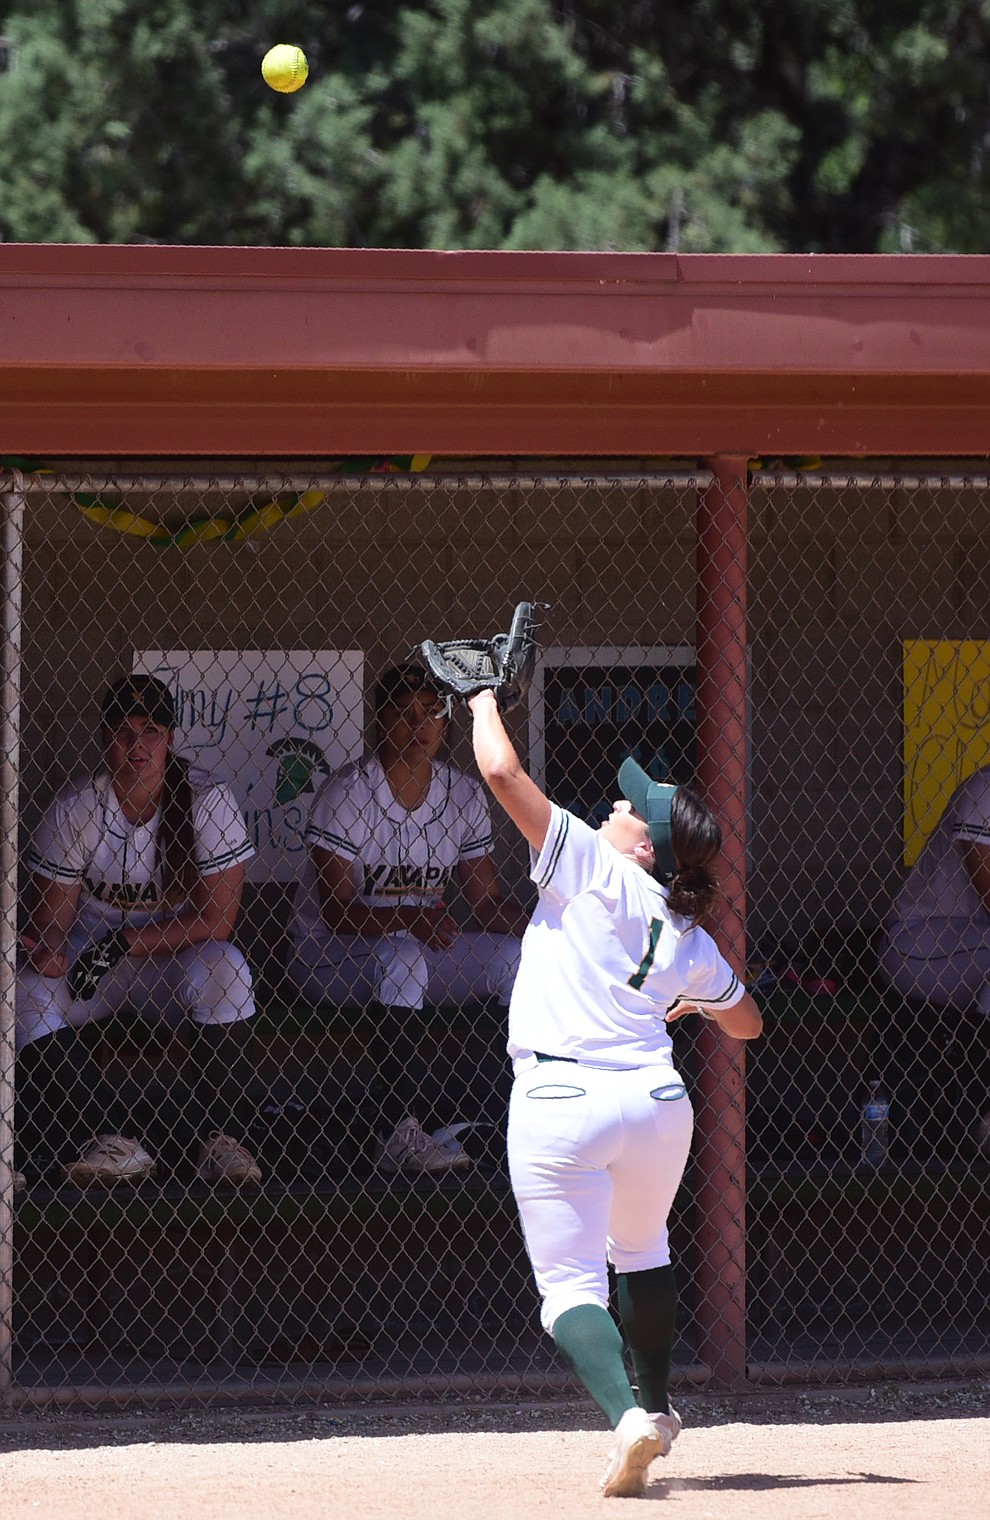 Yavapai's Karissa Pena has a bead on the ball in foul territory as they faced Scottsdale Community College Saturday, April 22 in Prescott.